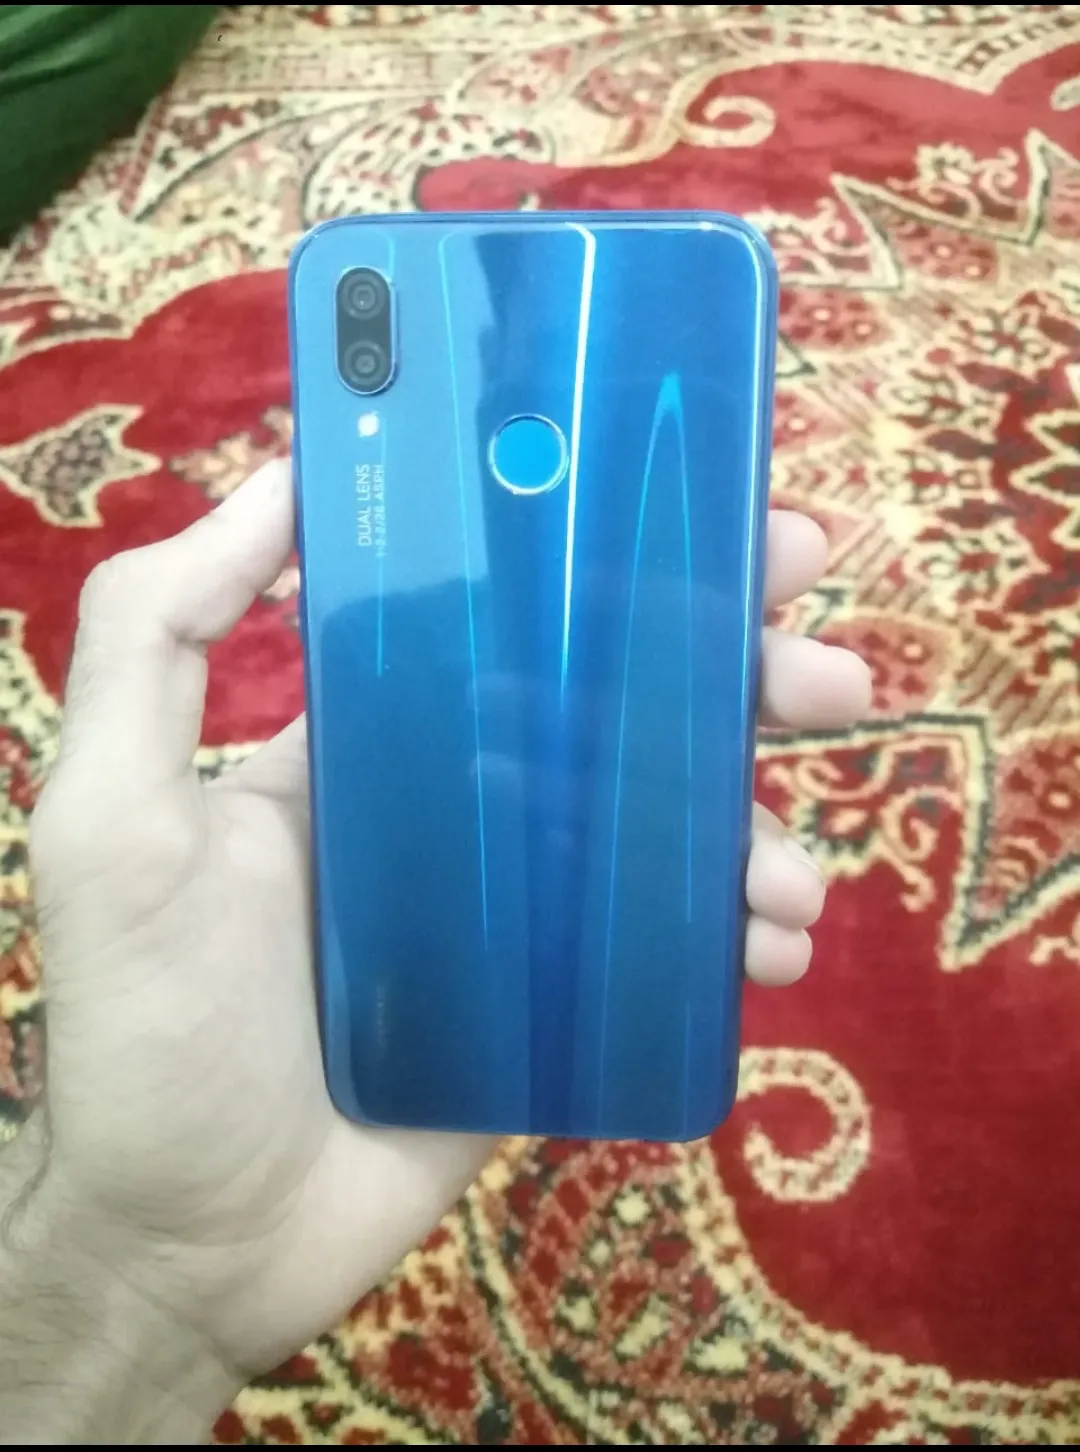 Huawei p20 lite for sale - photo 1